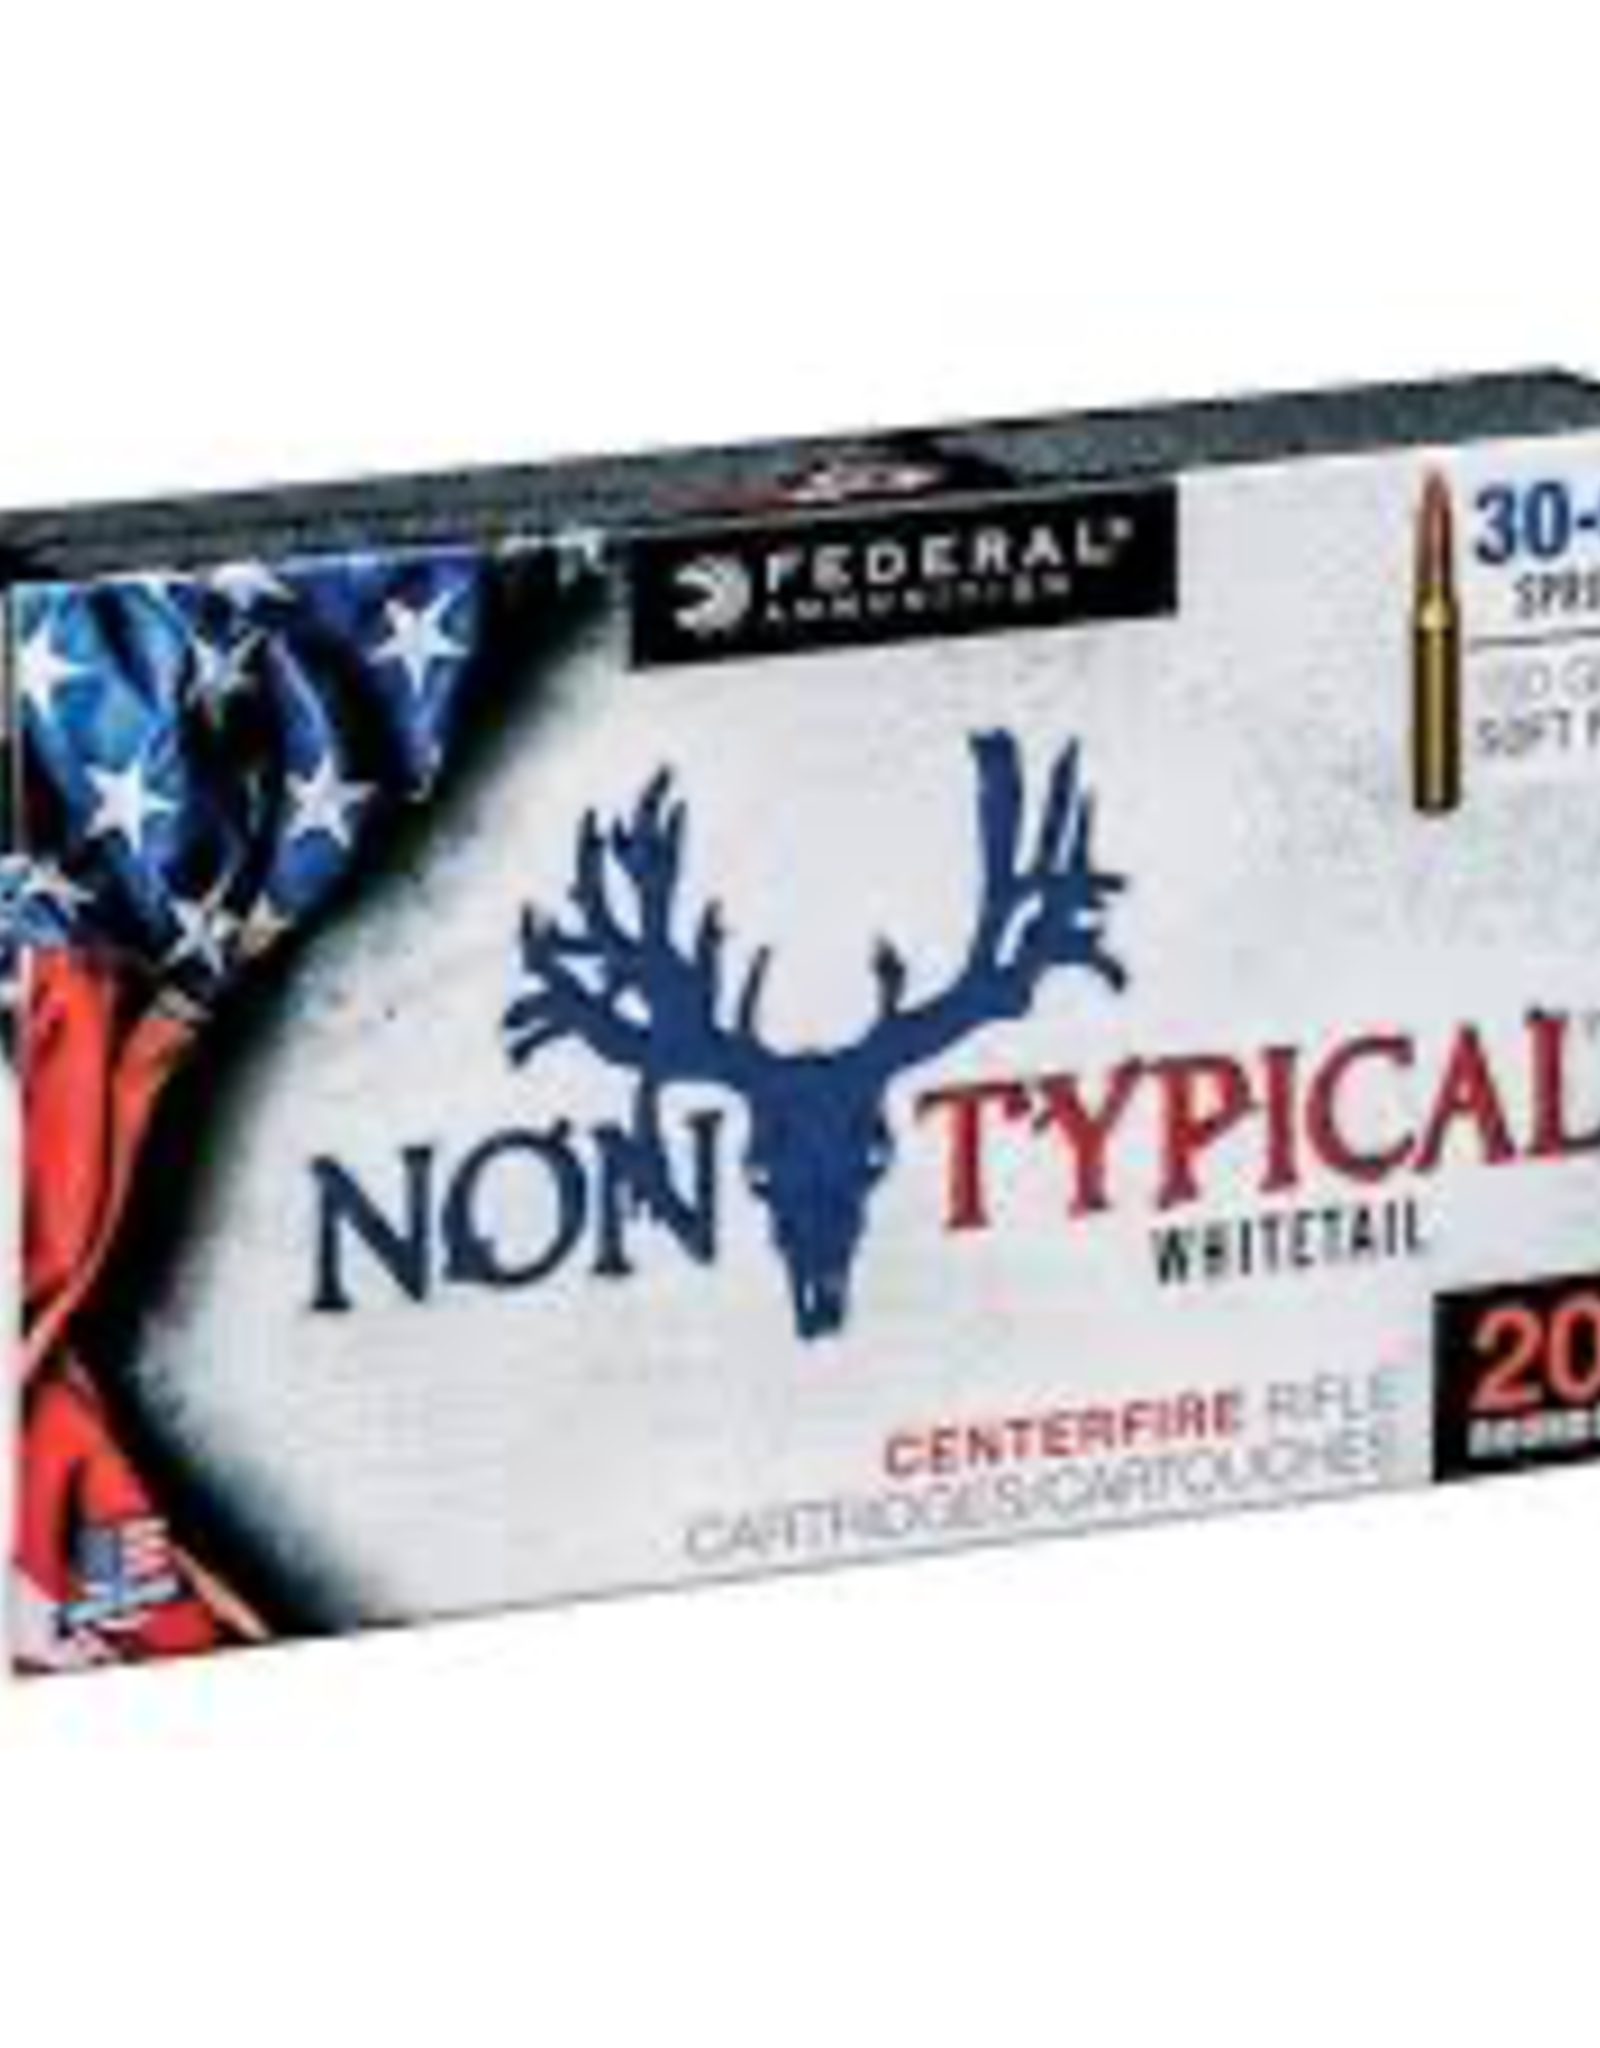 Federal NON TYPICAL WHITETAIL